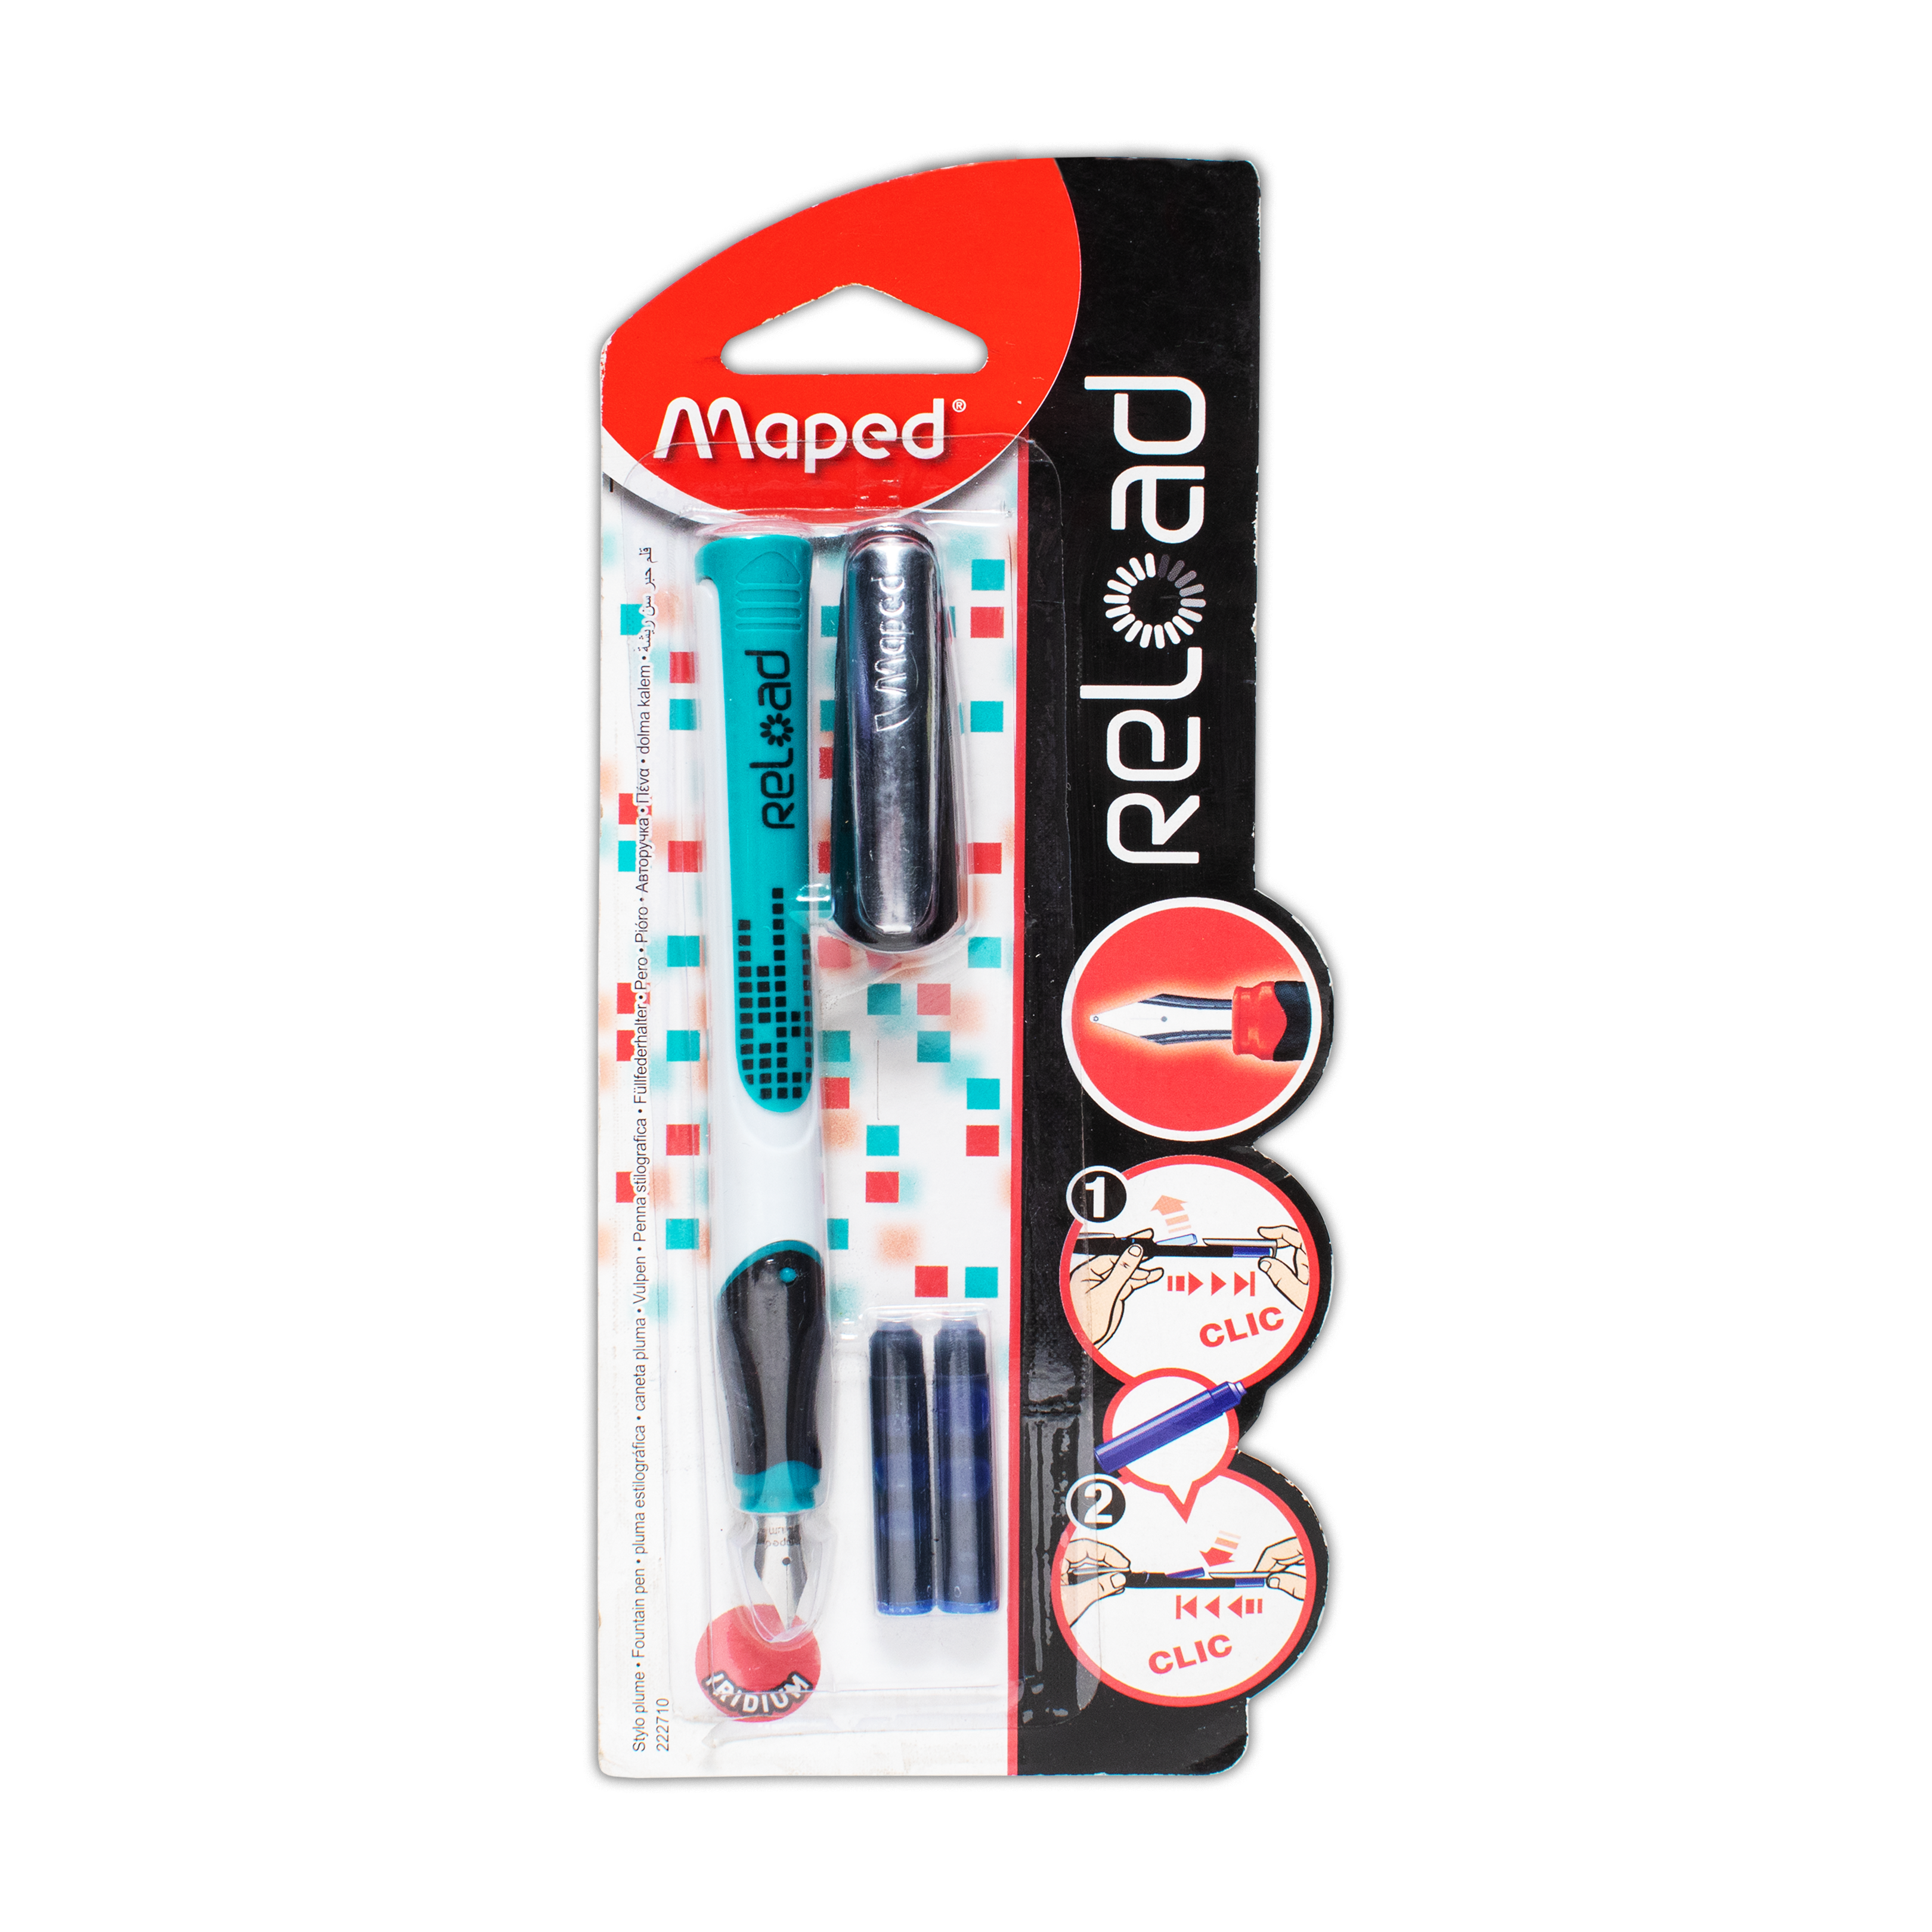 Maped Fountain Pen Reload with 3 Cartridge